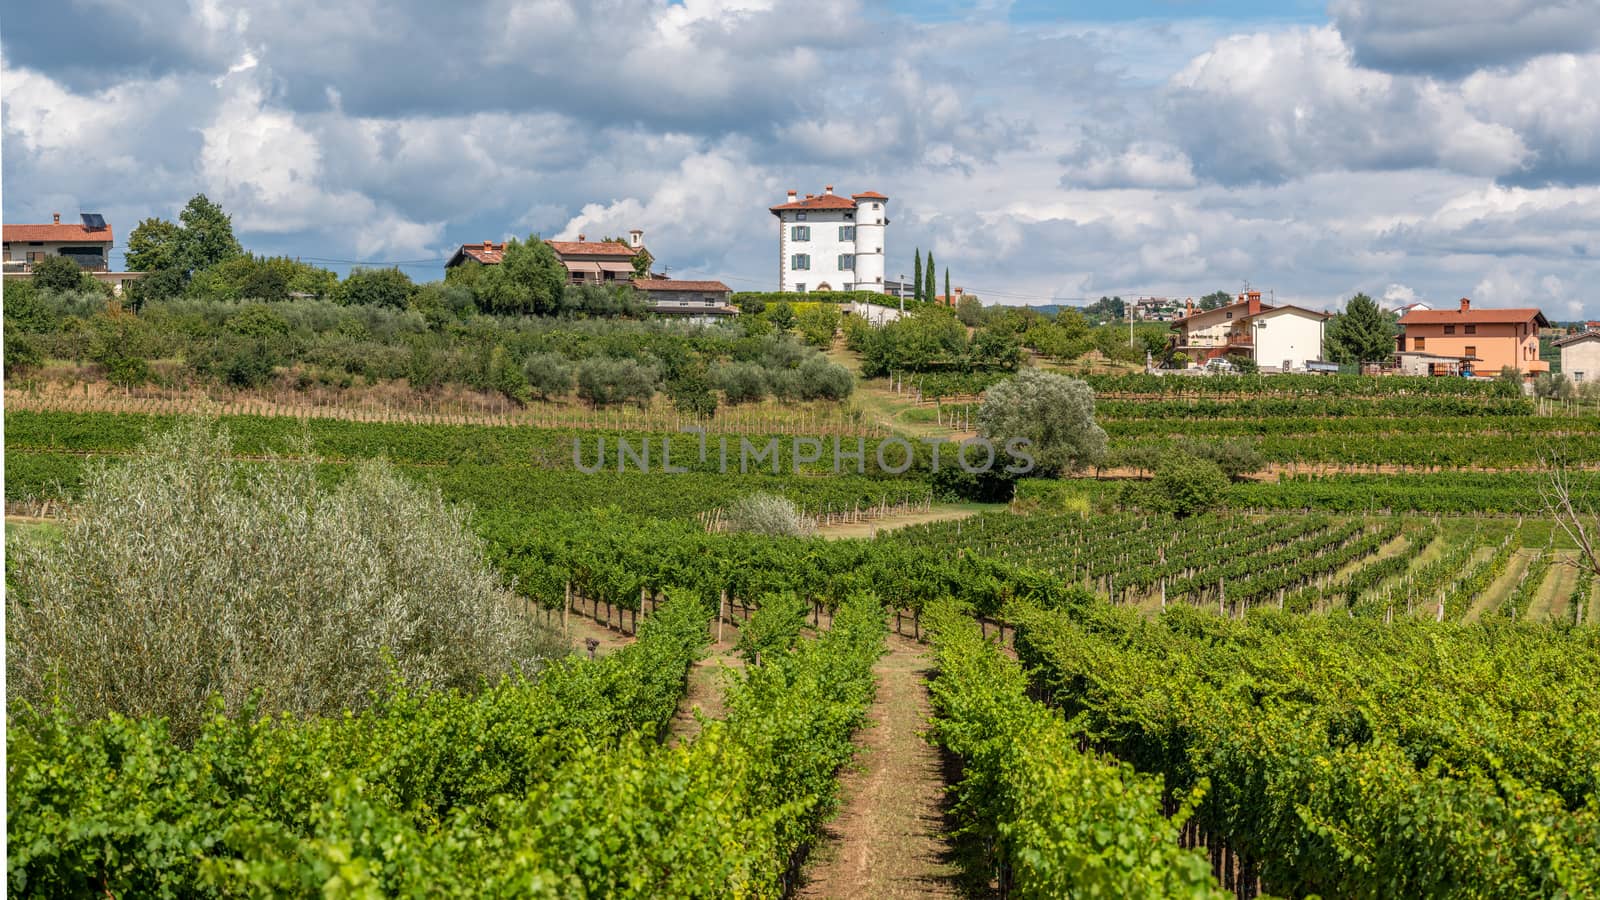 Vineyards and olive plantation in front of Village of Ceglo, also Zegla in famous Slovenian wine growing region of Goriska Brda, village on top of hill with villa Gredic and beautiful cloudscape in the sky